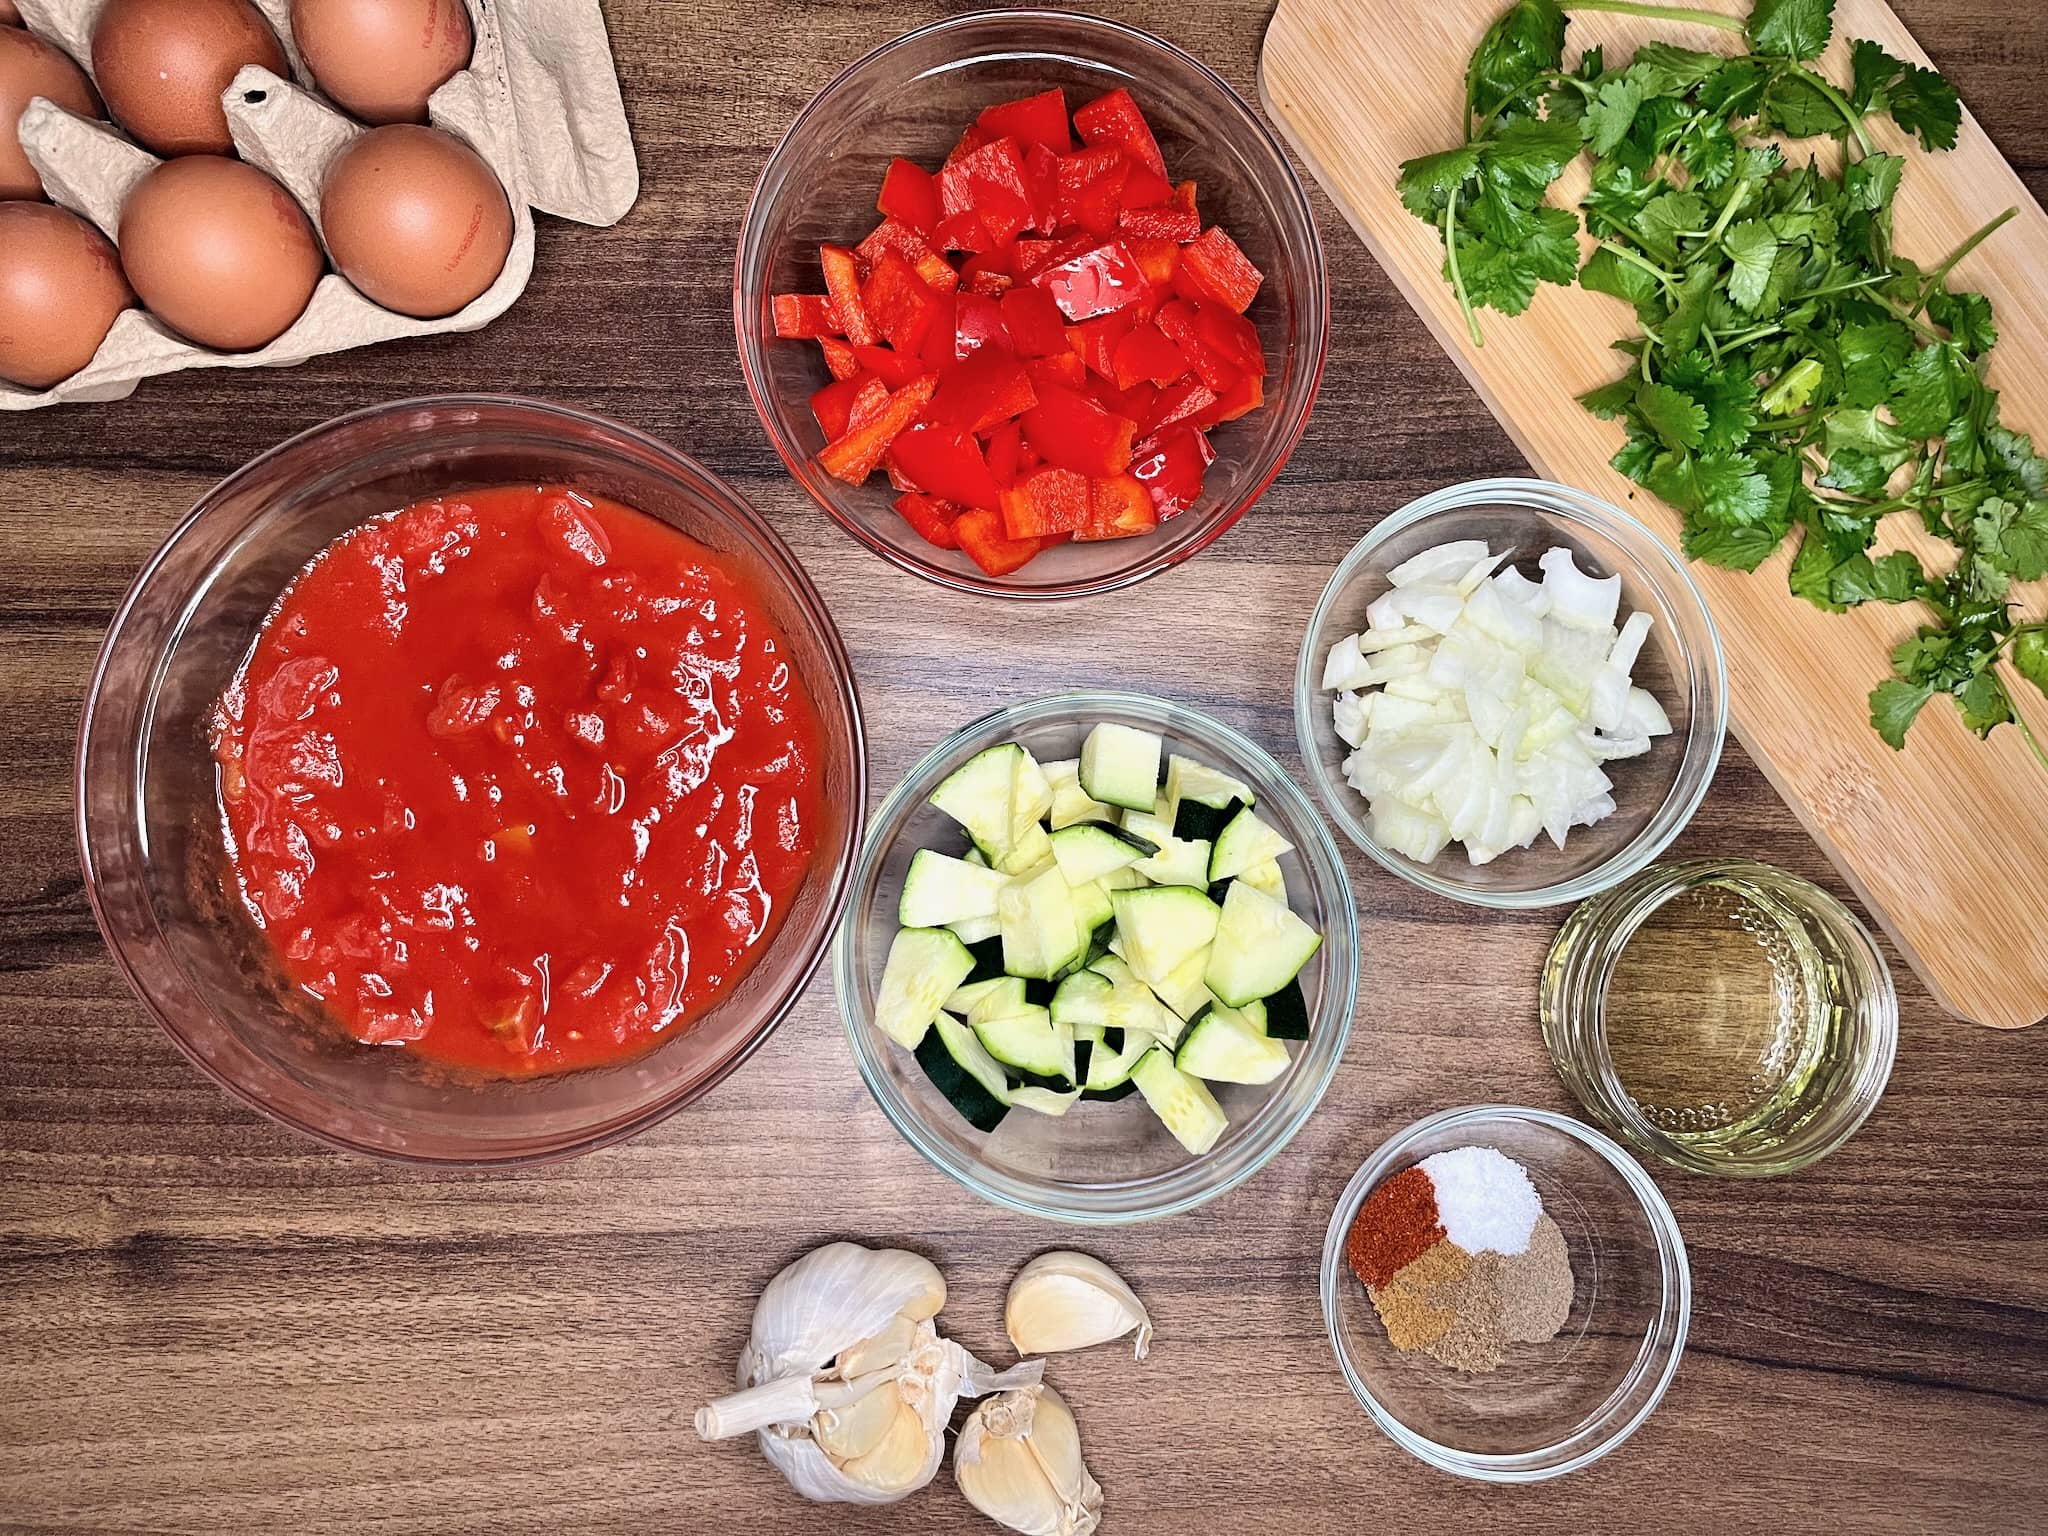 All ingredients ready for Shakshouka